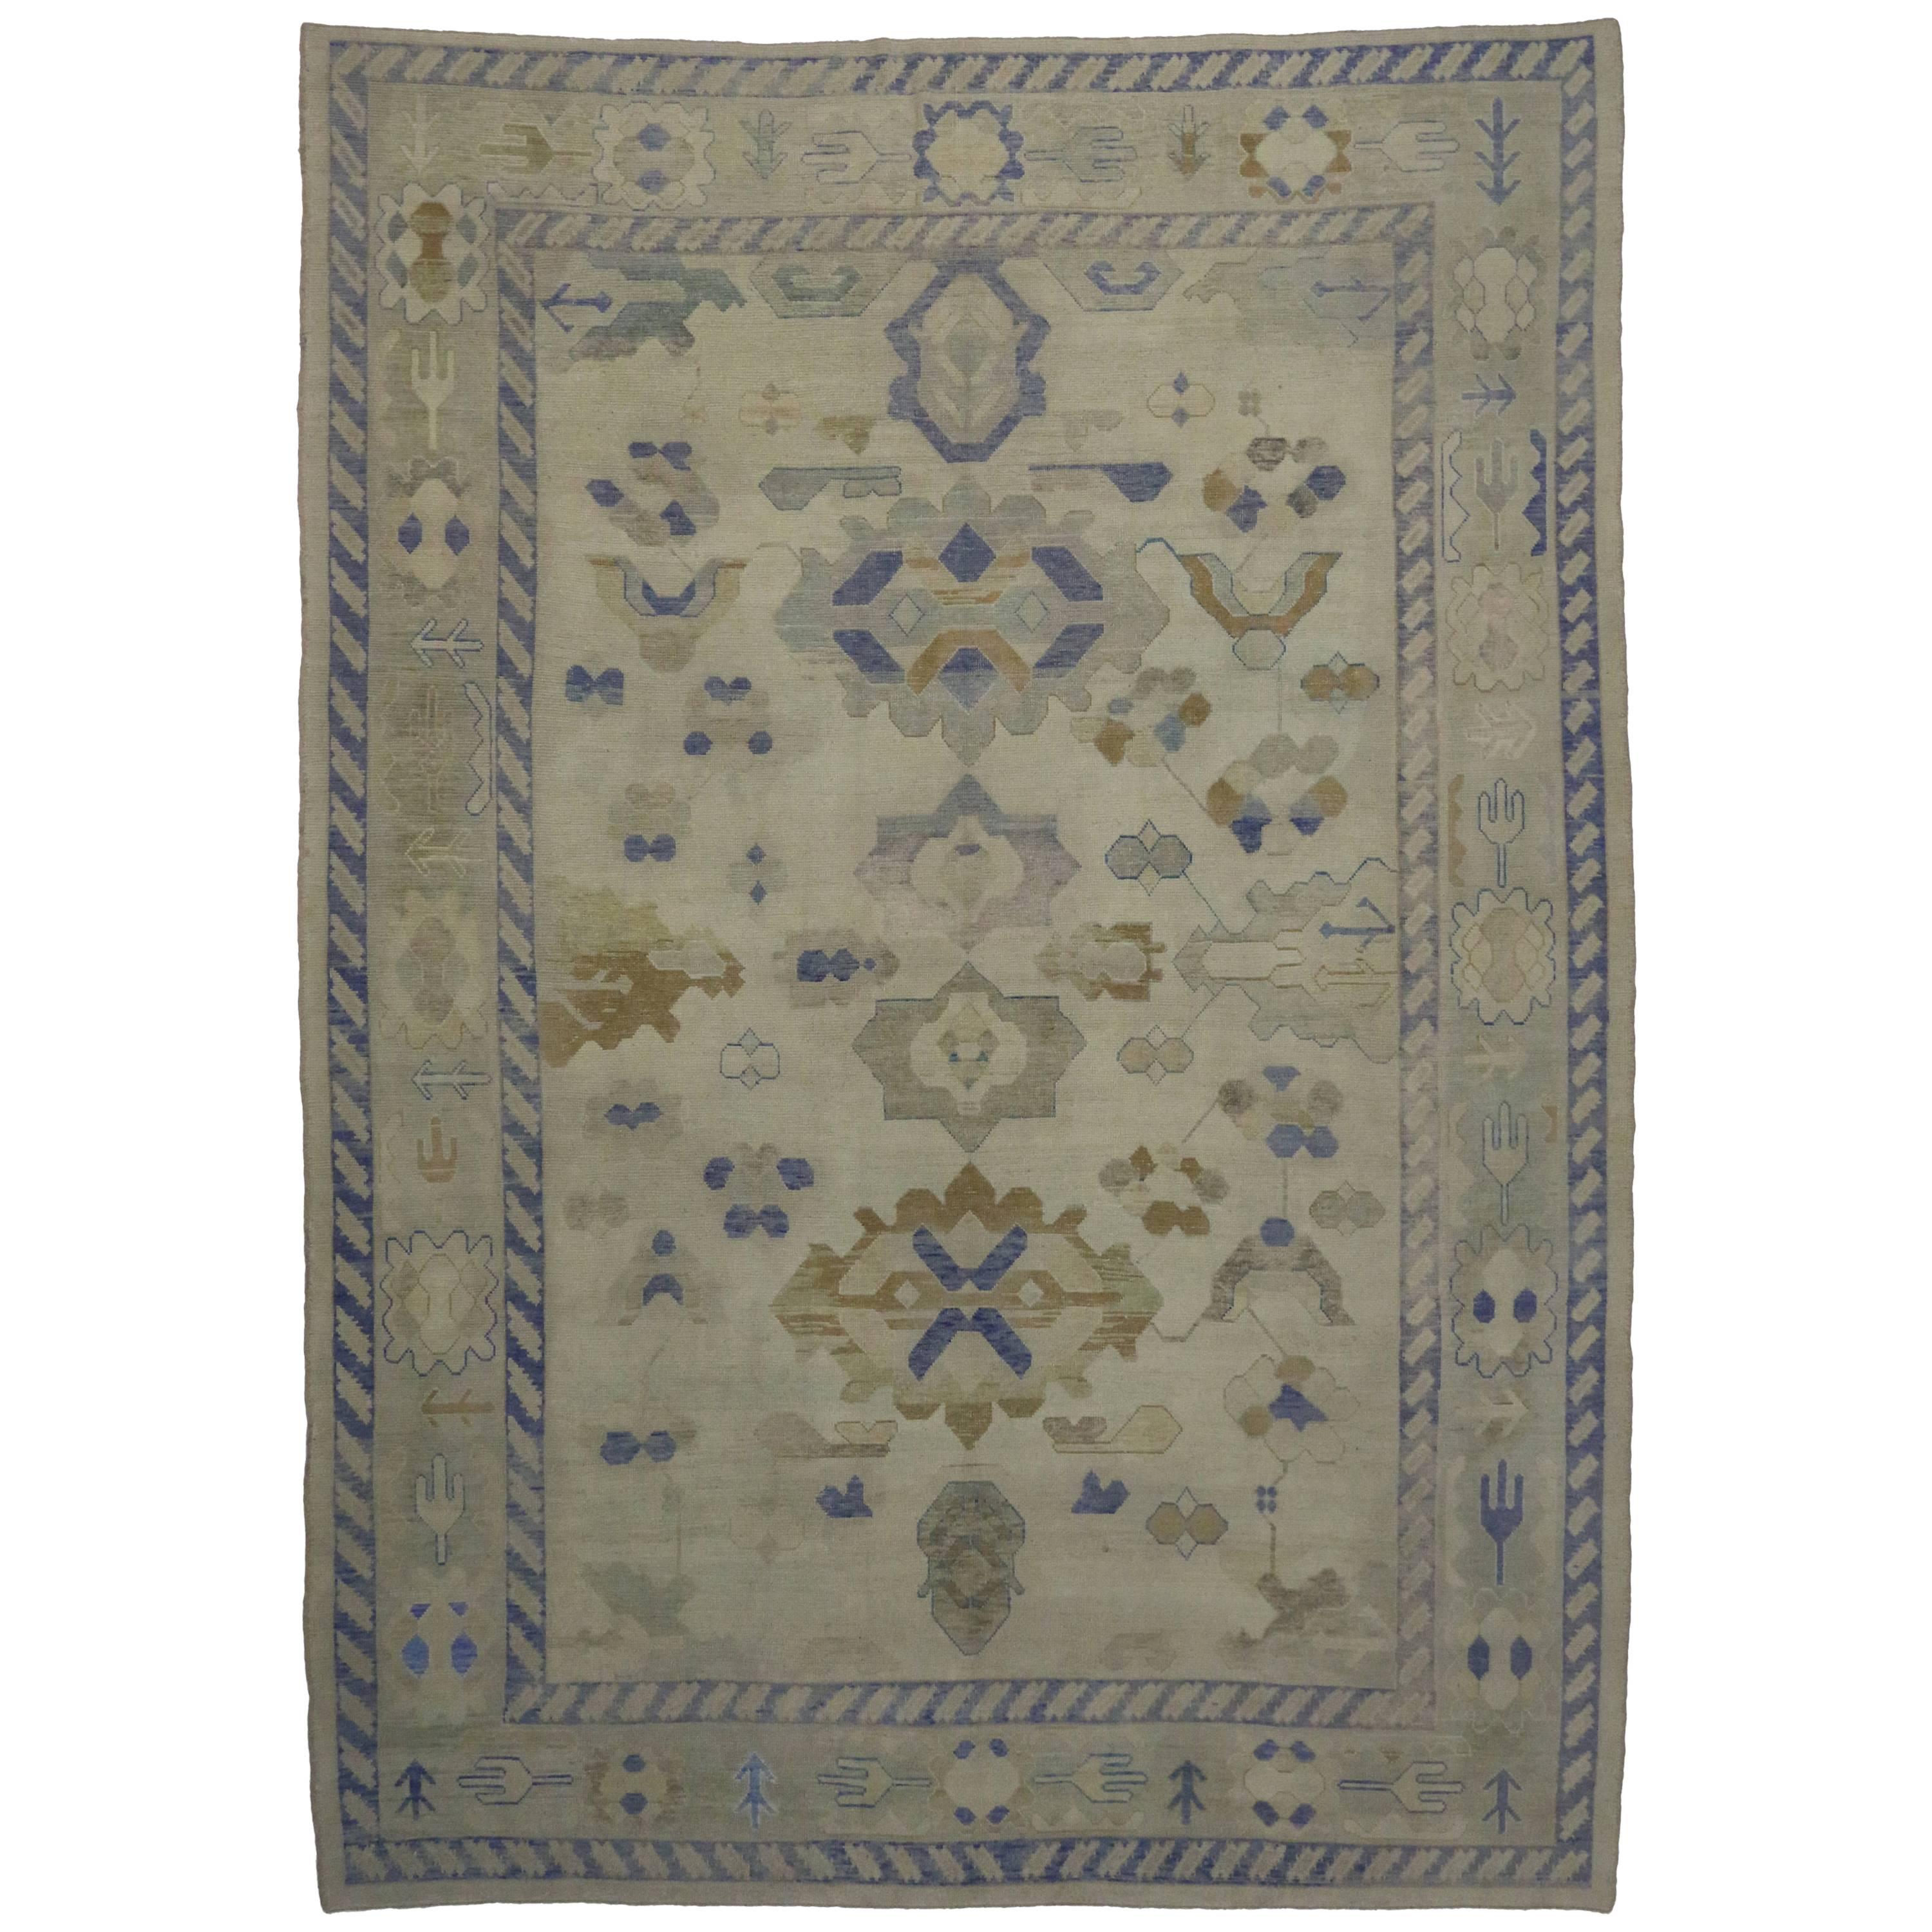 Modern Turkish Oushak Rug with Transitional Style in Coastal Colors